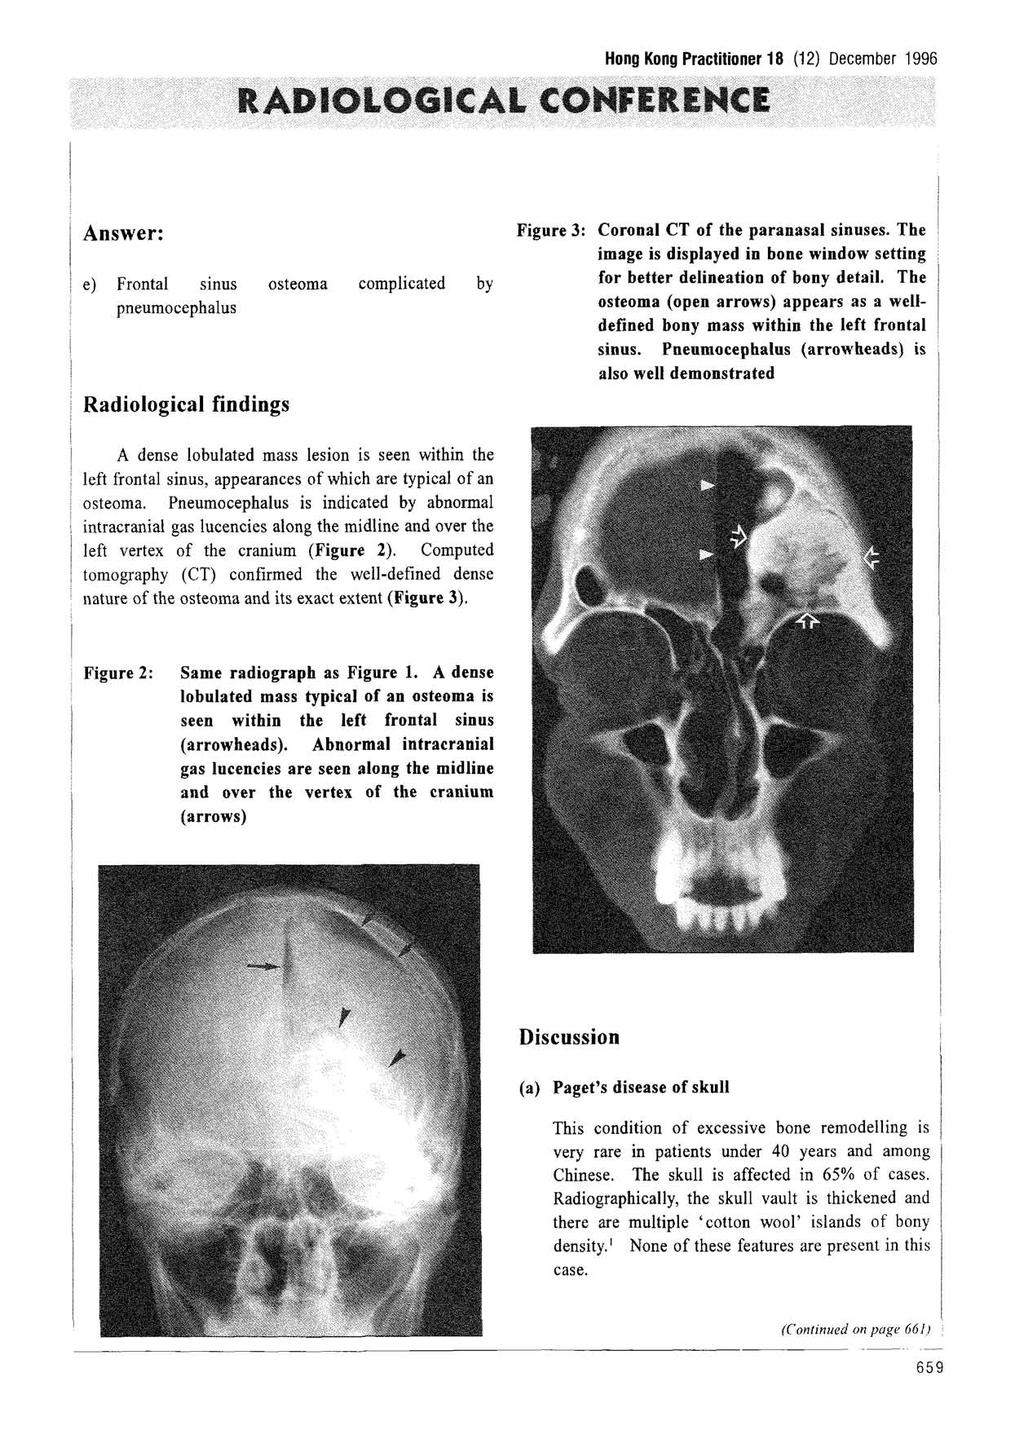 RADIOLOGICAL CONFERENCE Hong Kong Practitioner 18 (12) December 1996 Answer: e) Frontal sinus ; pneumocephalus Radiological findings osteoma complicated by Figure 3: Coronal CT of the paranasal